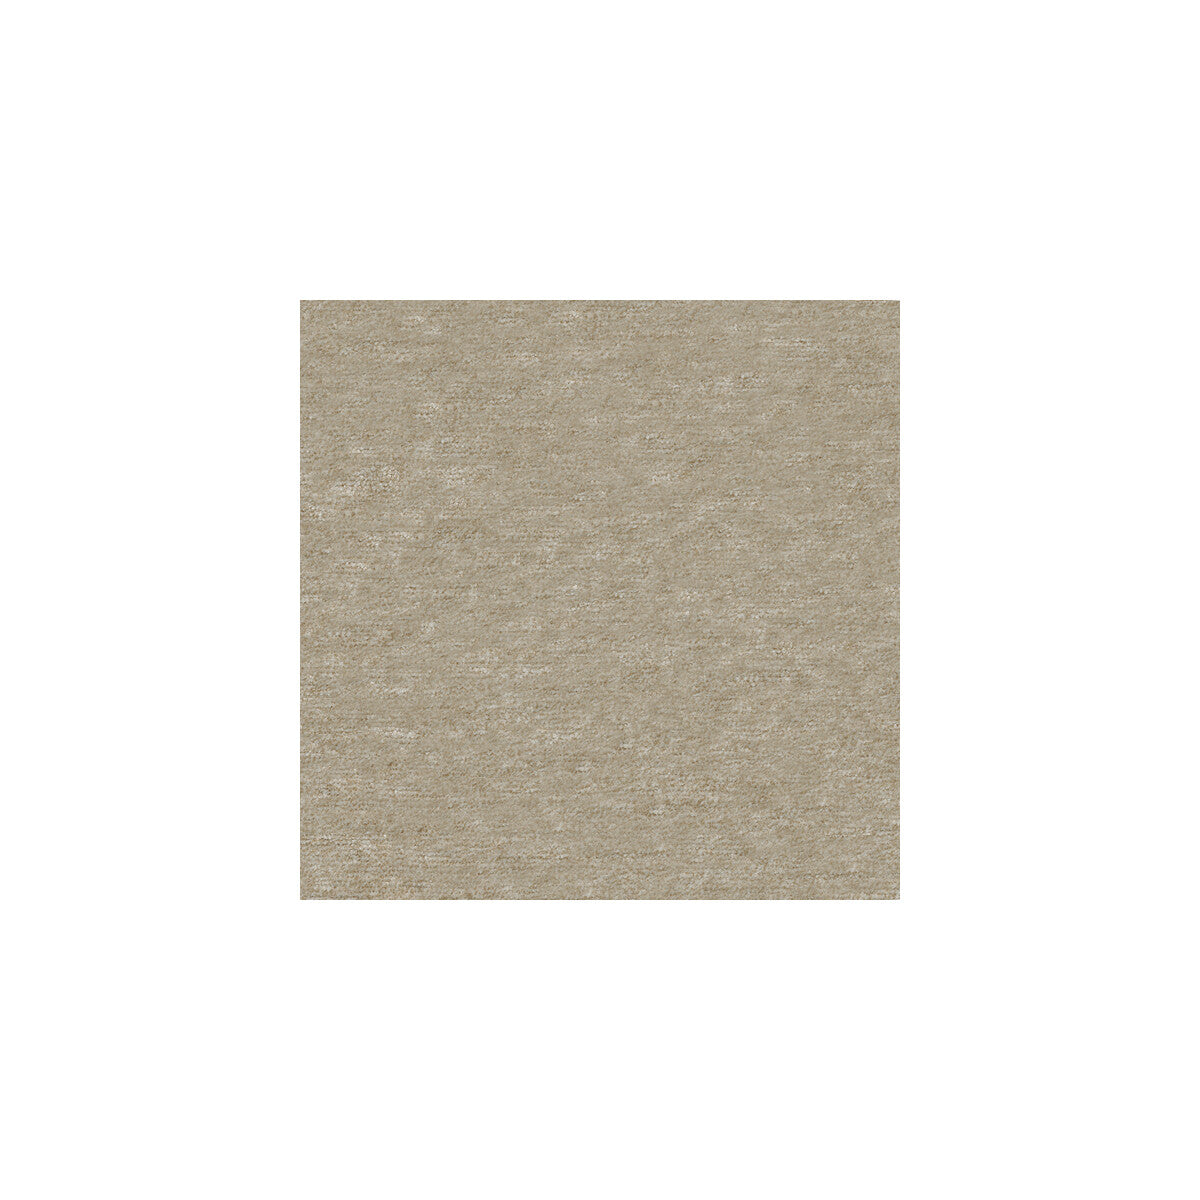 Kravet Contract fabric in 32016-16 color - pattern 32016.16.0 - by Kravet Contract